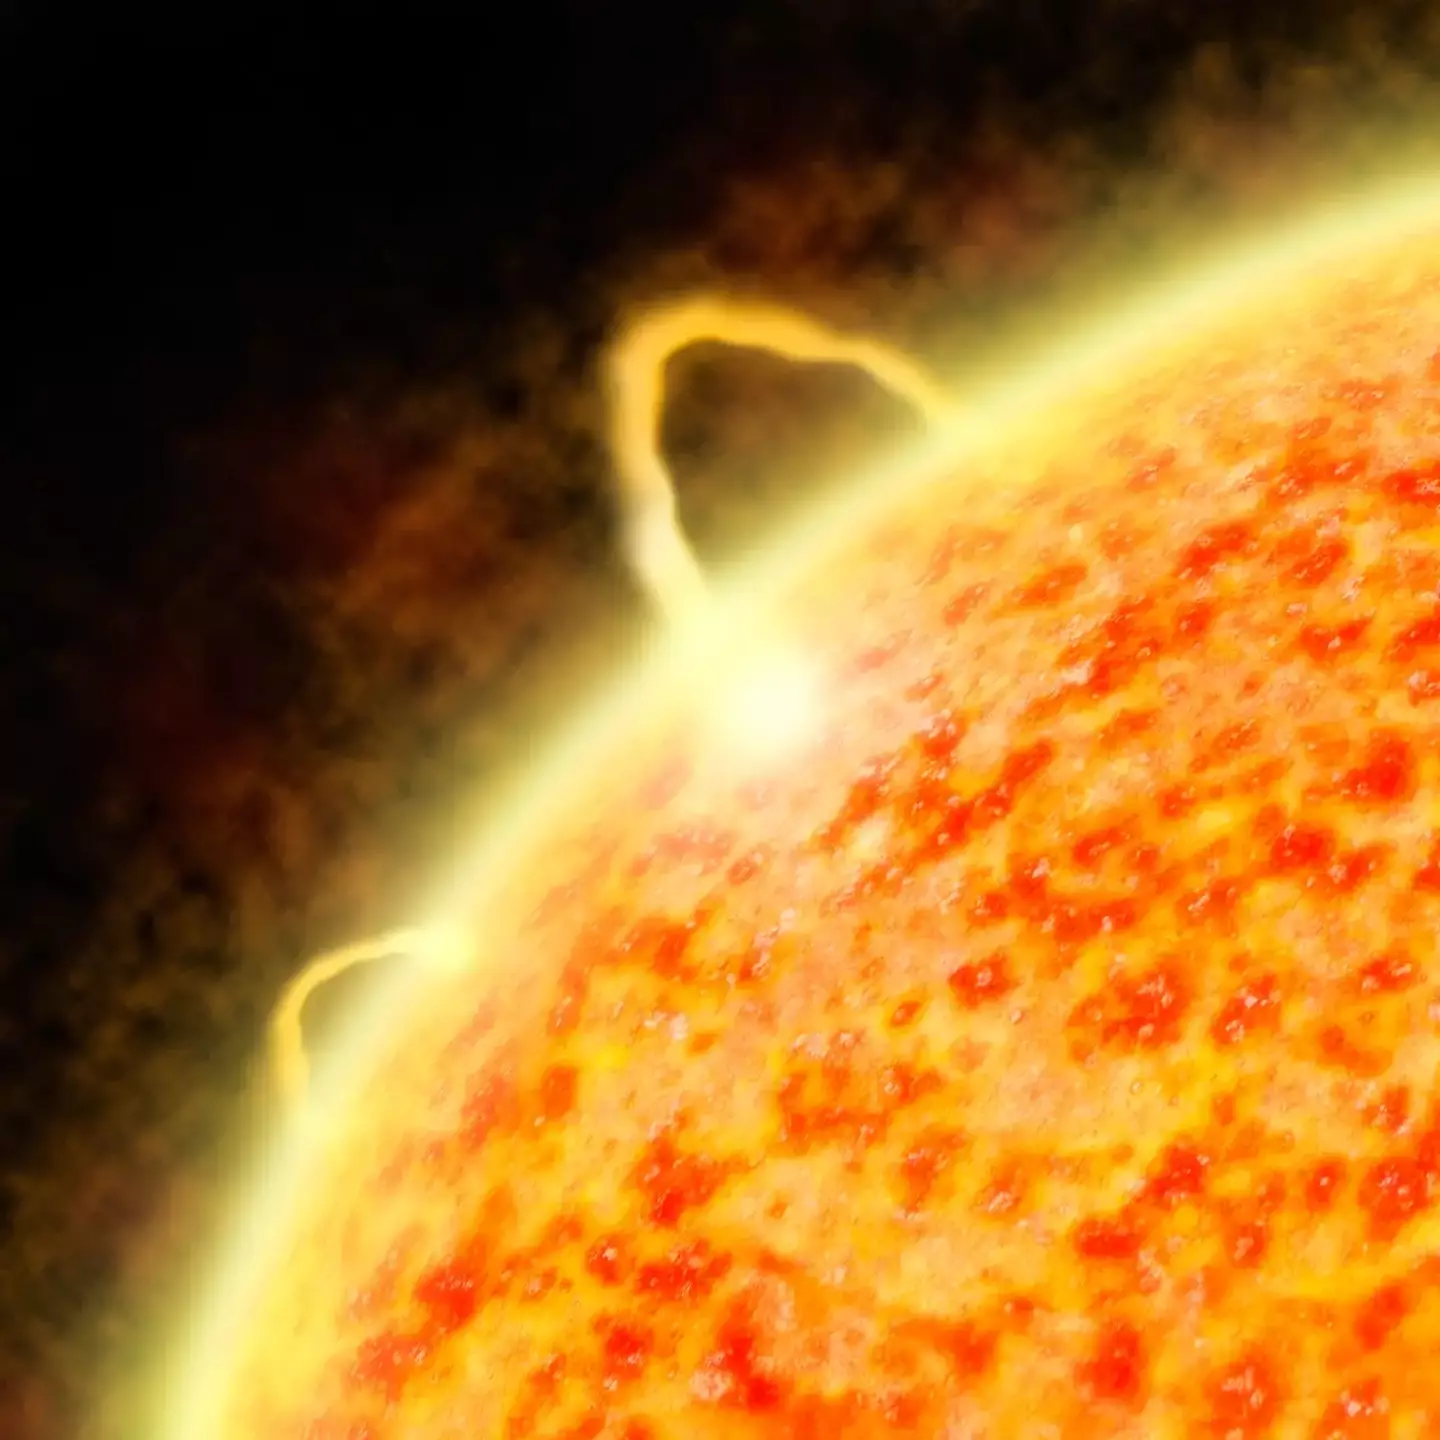 CMEs are enormous expulsions of plasma from the sun’s outer layer.